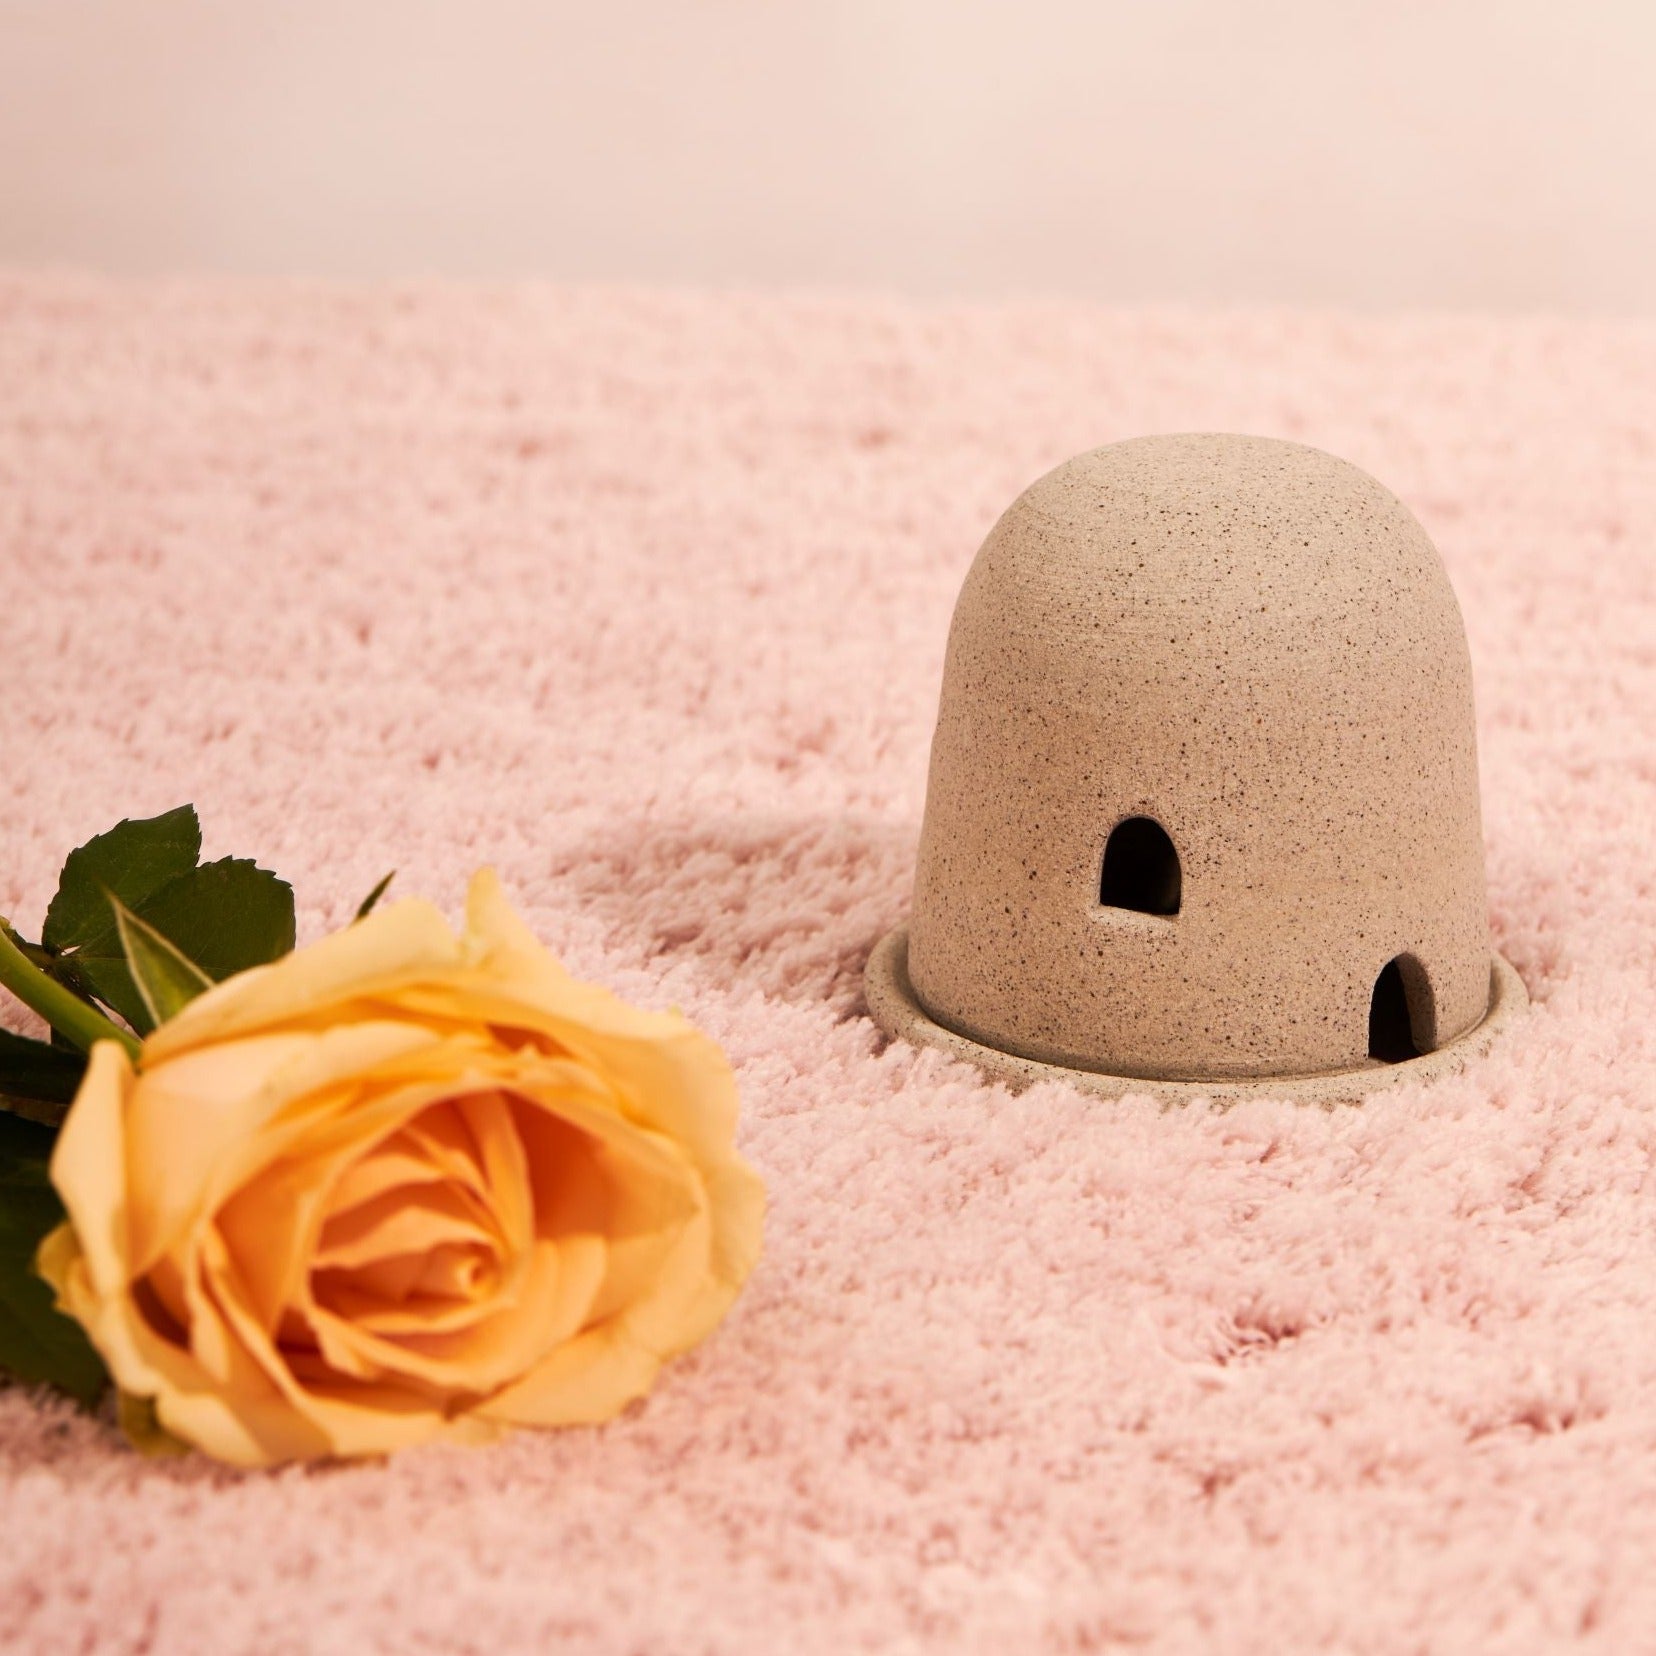 A grey dome burner sits on fluffy pink fabric with a yellow rose on the left. The dome burner has a smooth dome top with hand carved windows and sits on a dish.